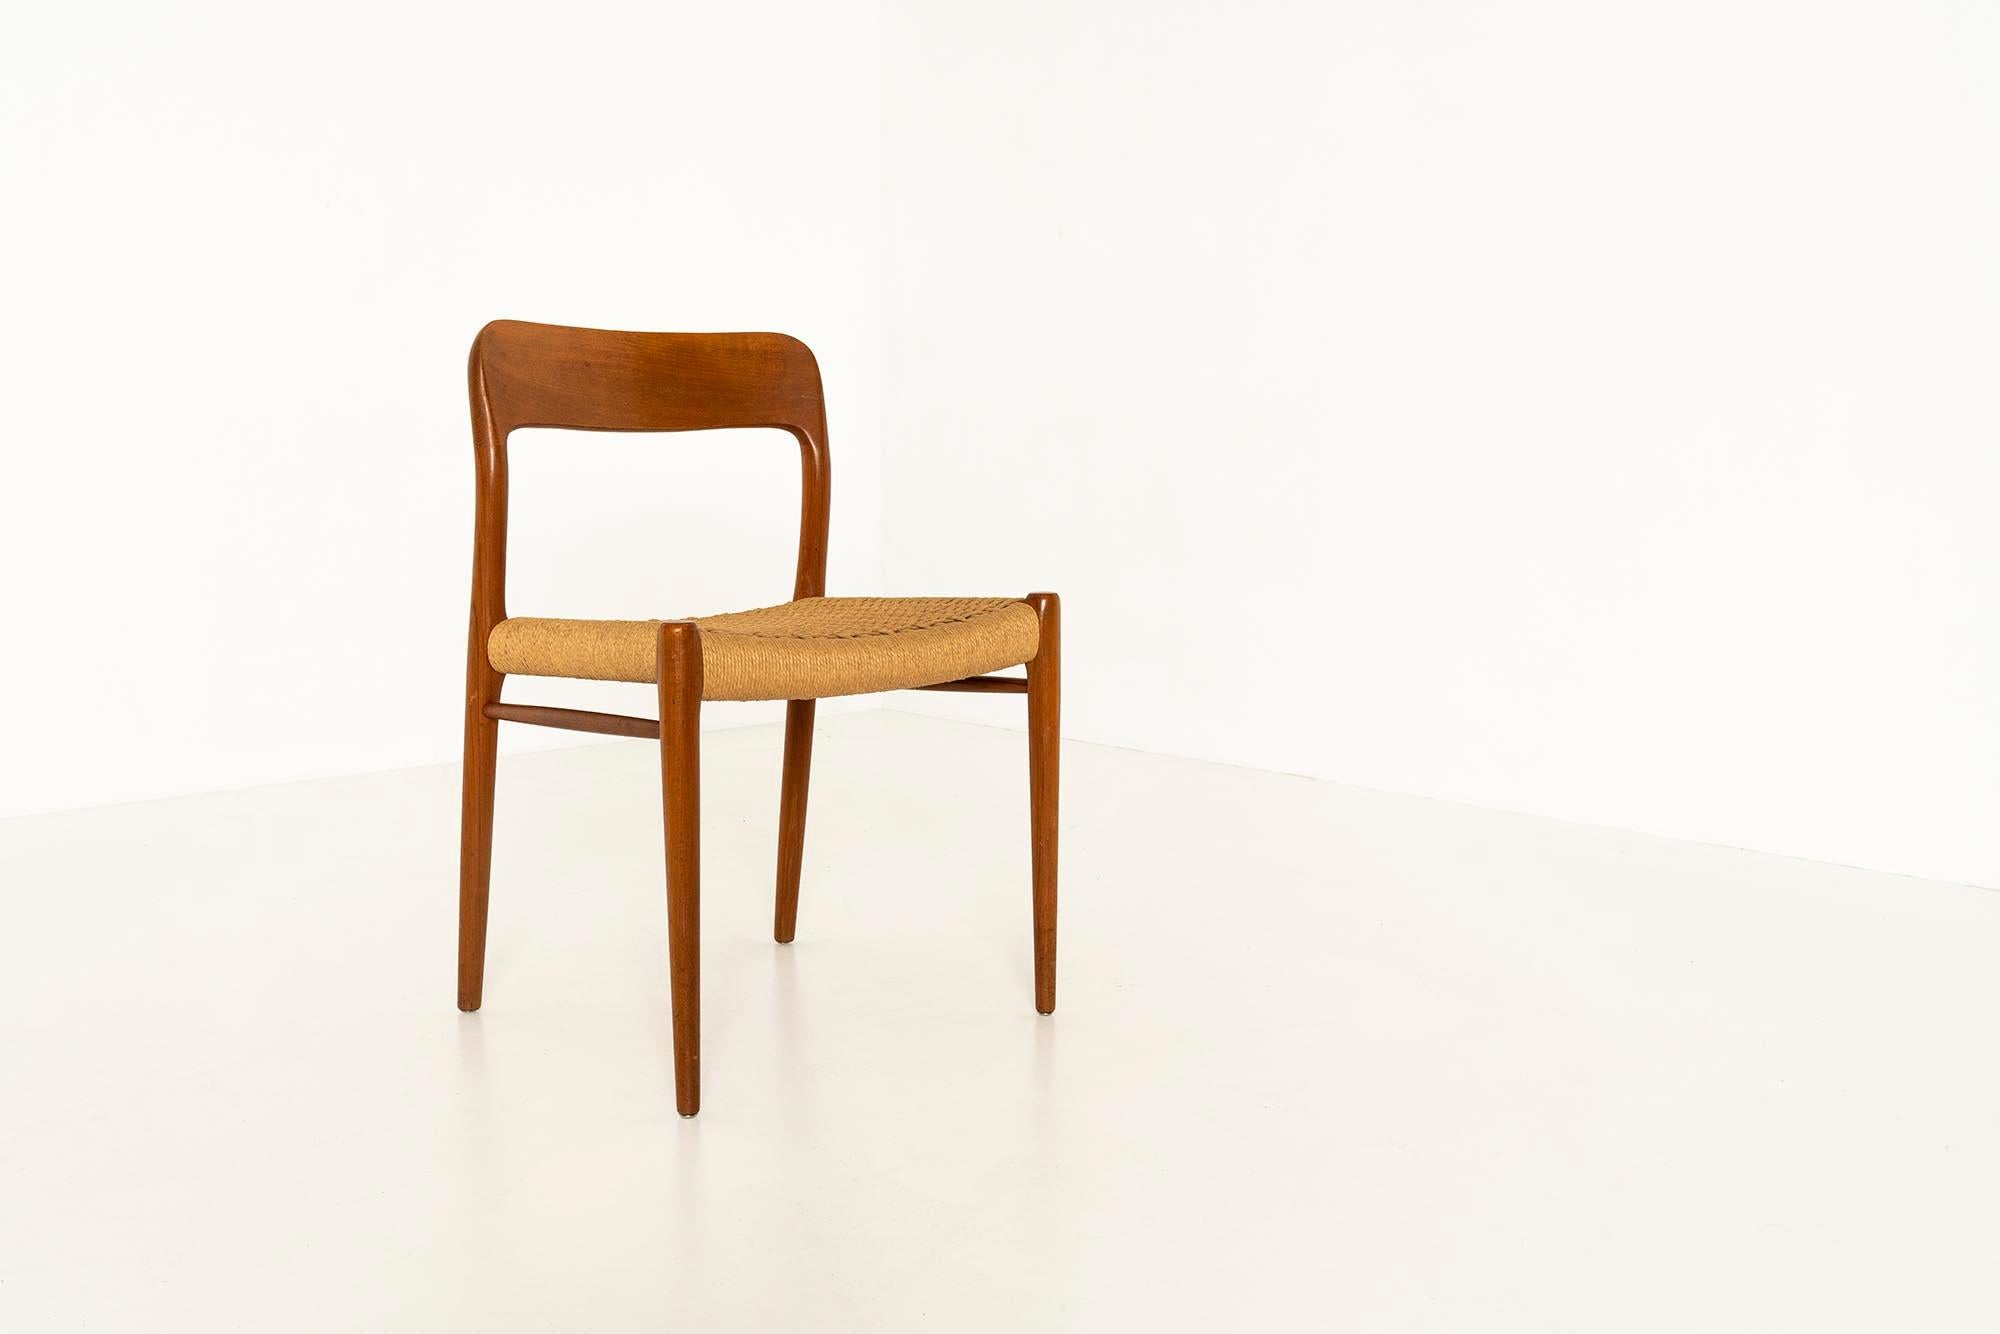 10 Niels Otto Møller 'Model 75' Chairs in Teak and Danish Paper Cord, 1960s For Sale 2